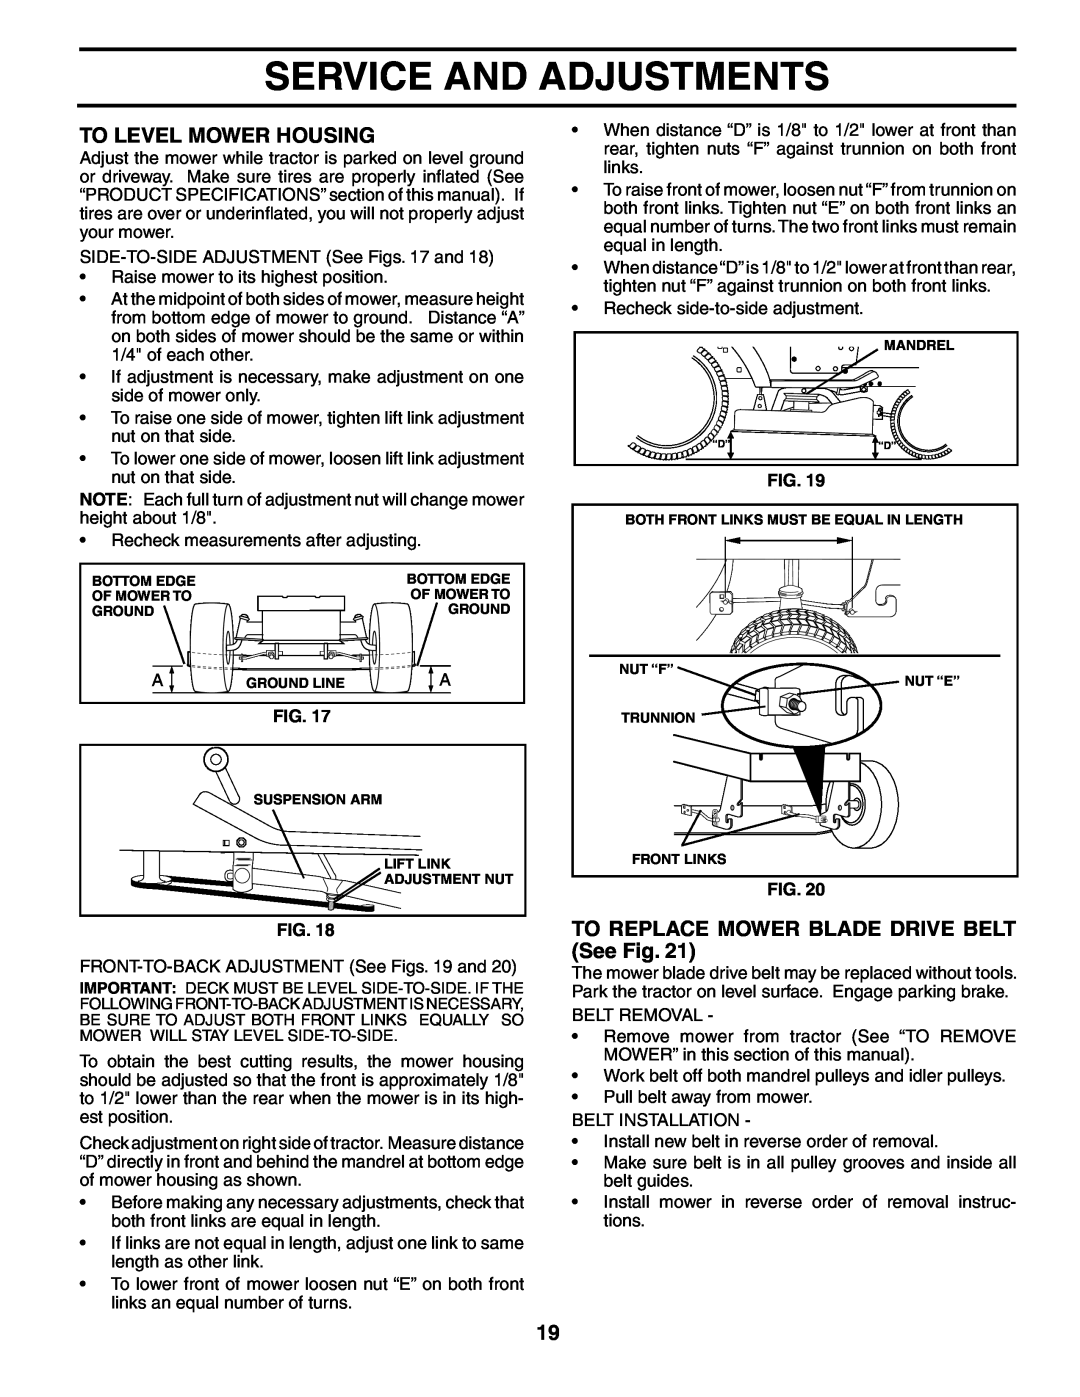 Poulan 184518, 954569554 manual To Level Mower Housing, TO REPLACE MOWER BLADE DRIVE BELT See Fig, Service And Adjustments 